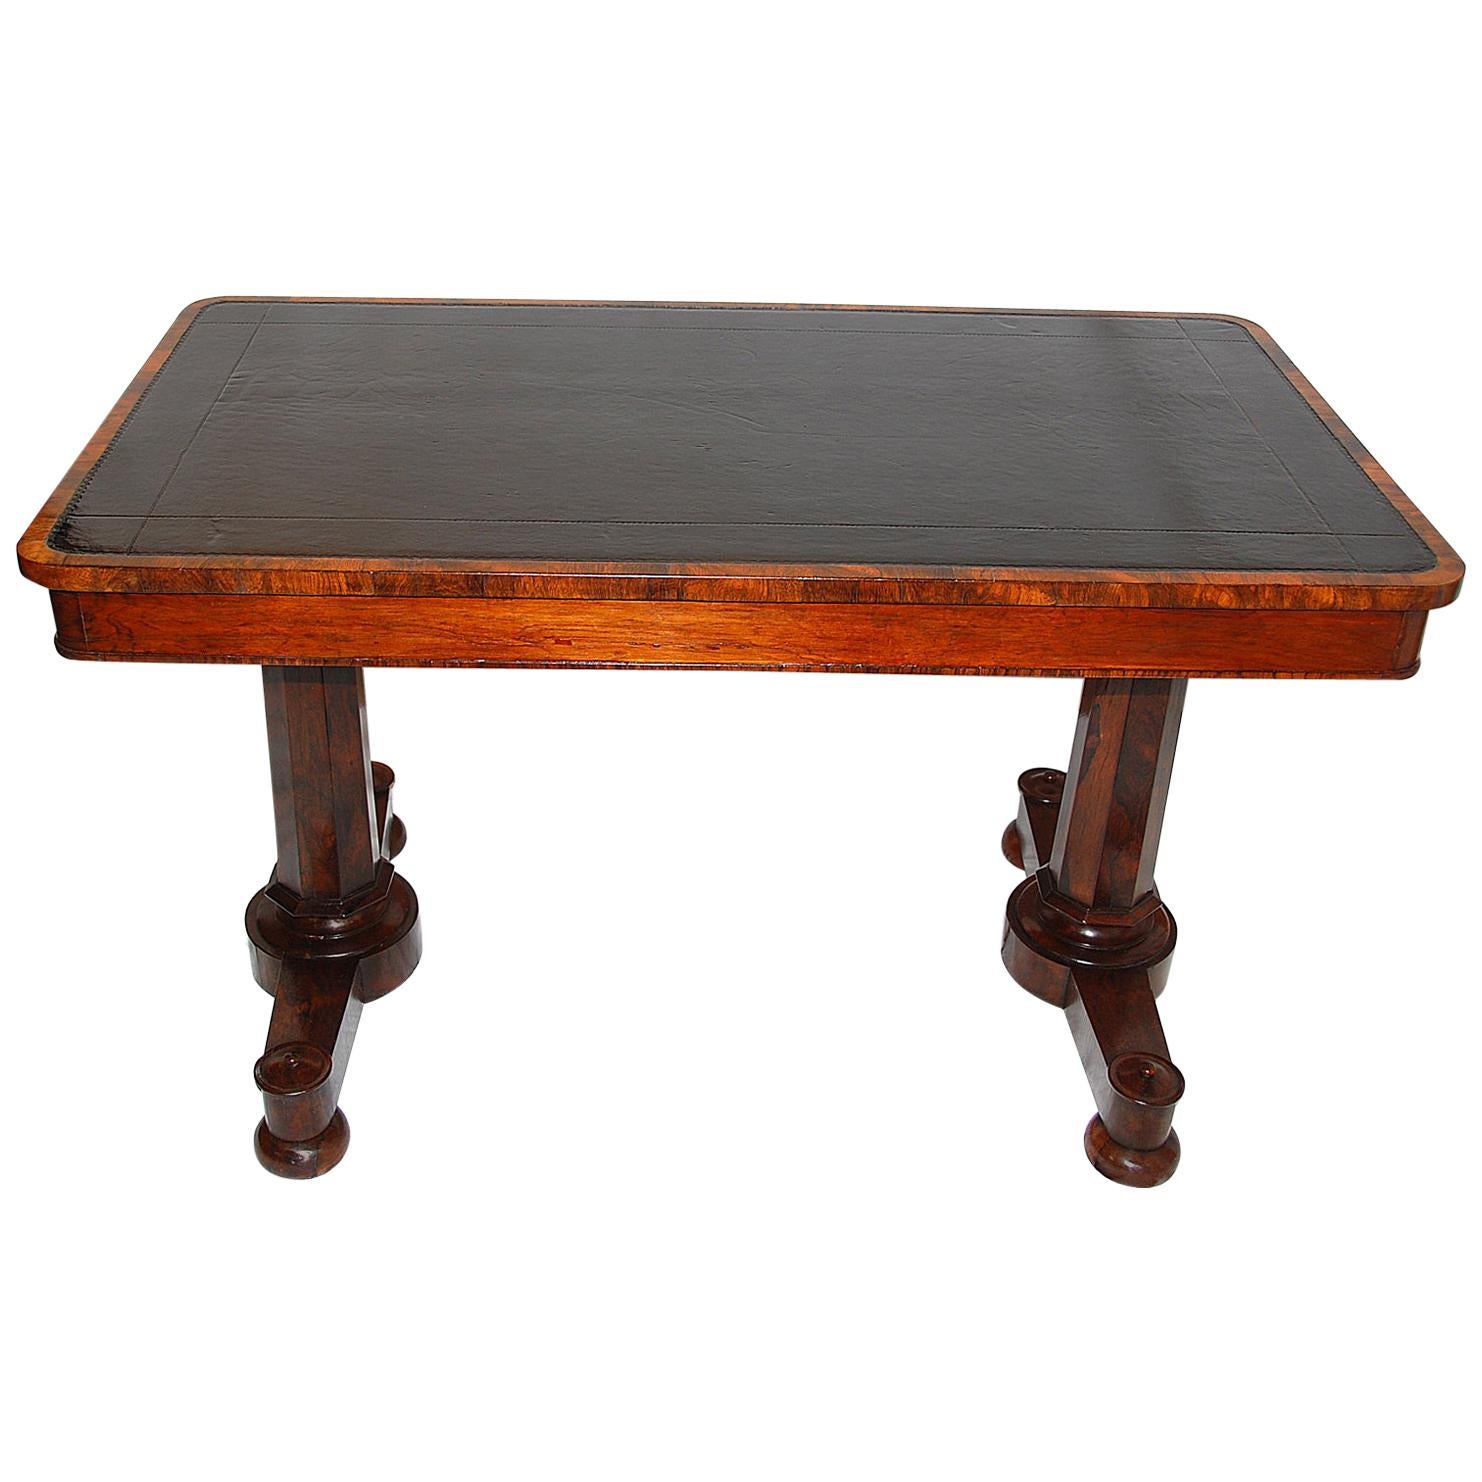 English William IV Period Rosewood Pedestal Writing Table